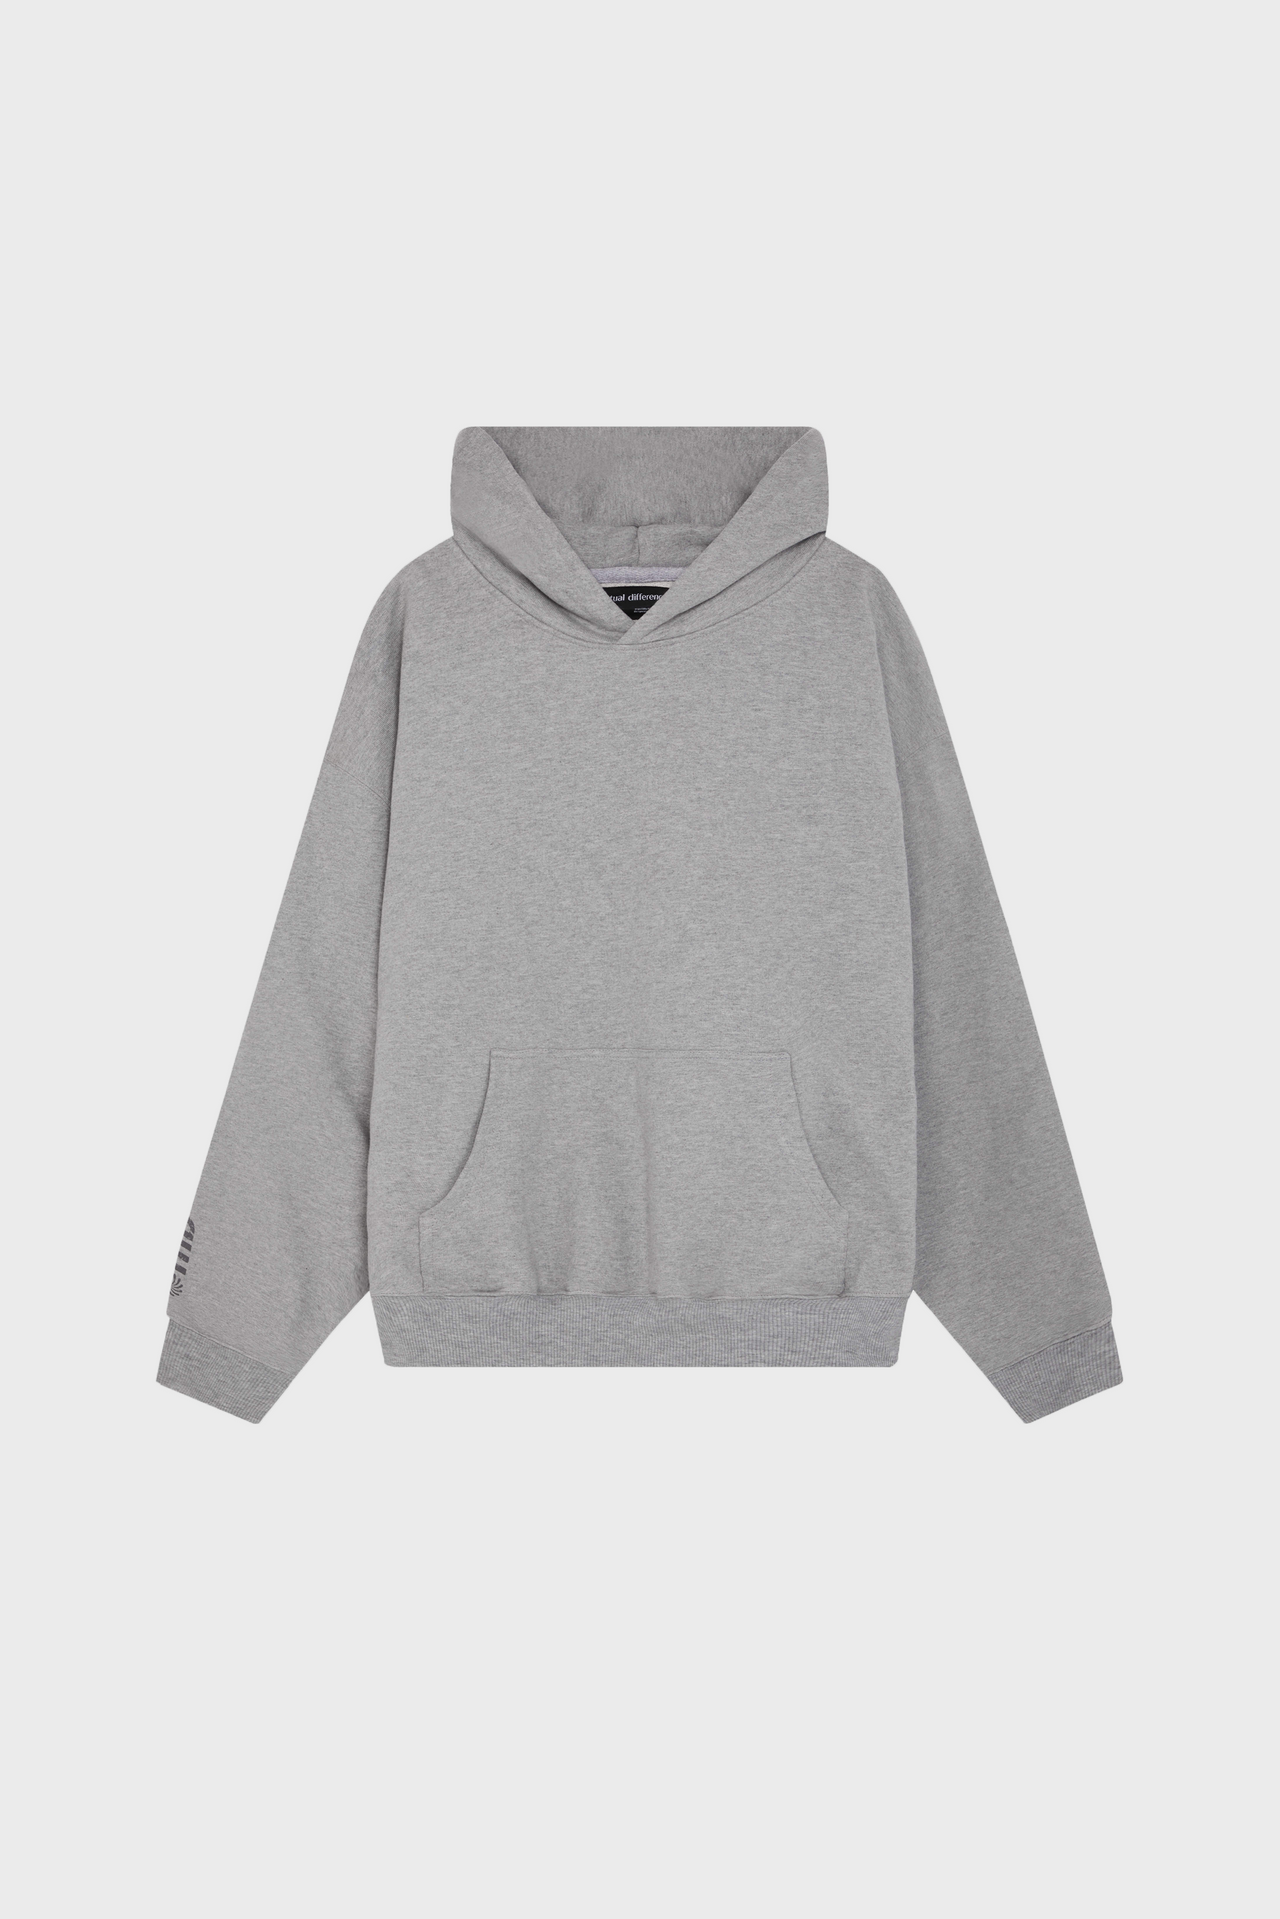 GREY POWERED HOODIE – Mutual Differences